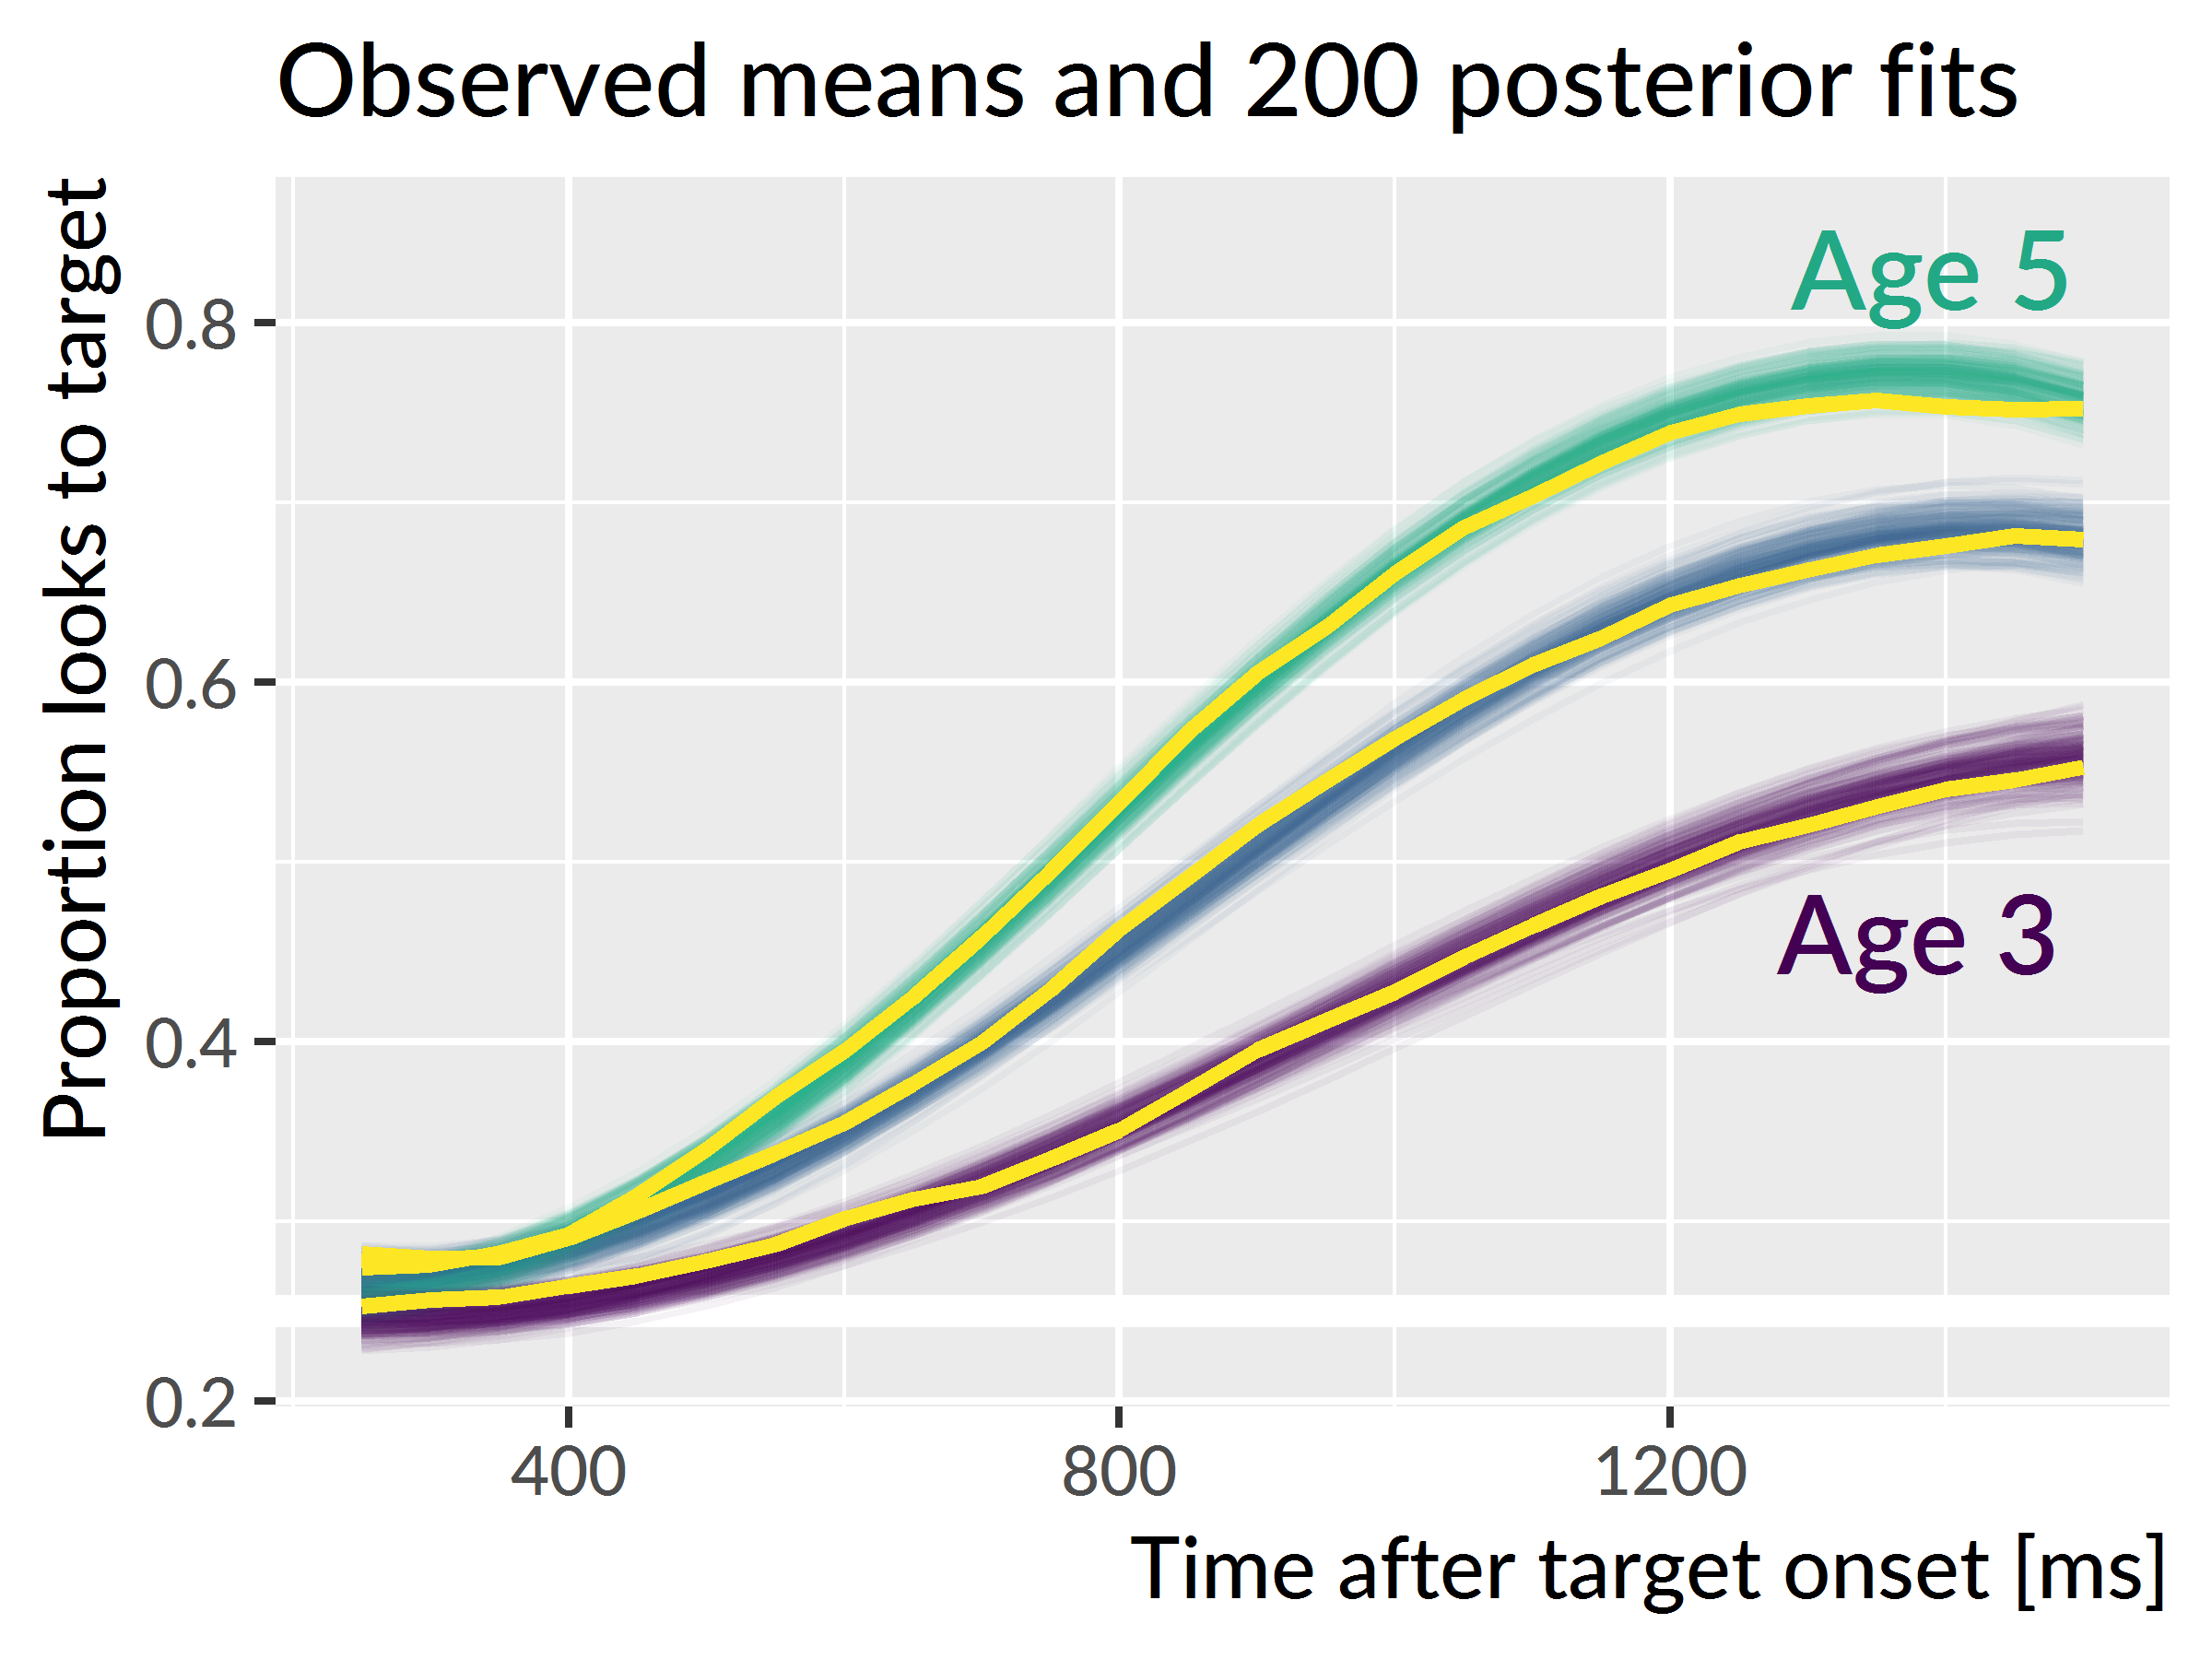 Population-average (“fixed effects”) word recognition growth curves at each age. Colored lines represent 200 posterior samples of these growth curves; these are included to visualize the uncertainty about the population averages. The thick light lines represent the observed average growth curve at each age.